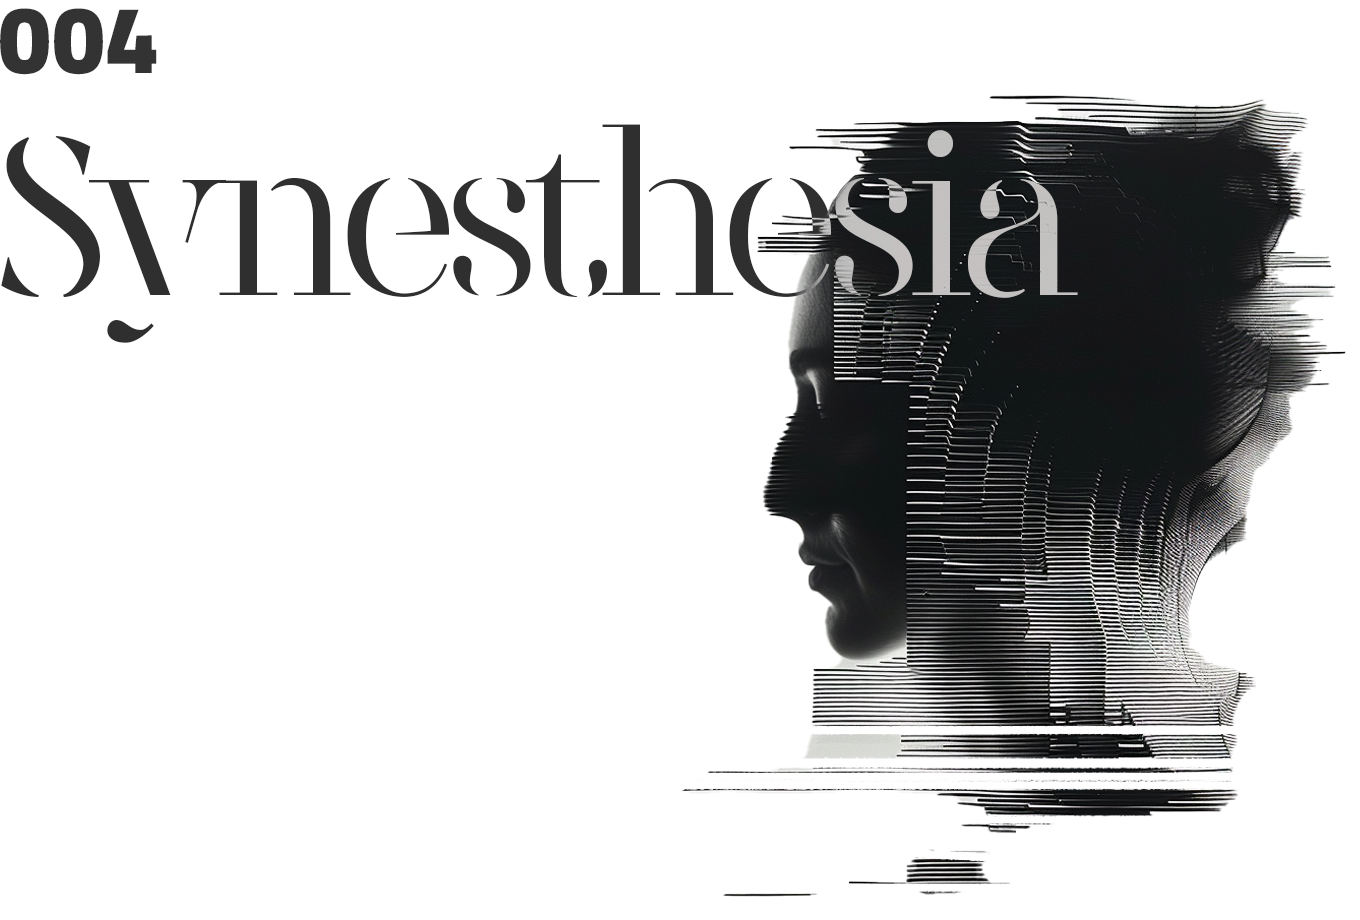 Issue 004: Synesthesia ft. Playmodes